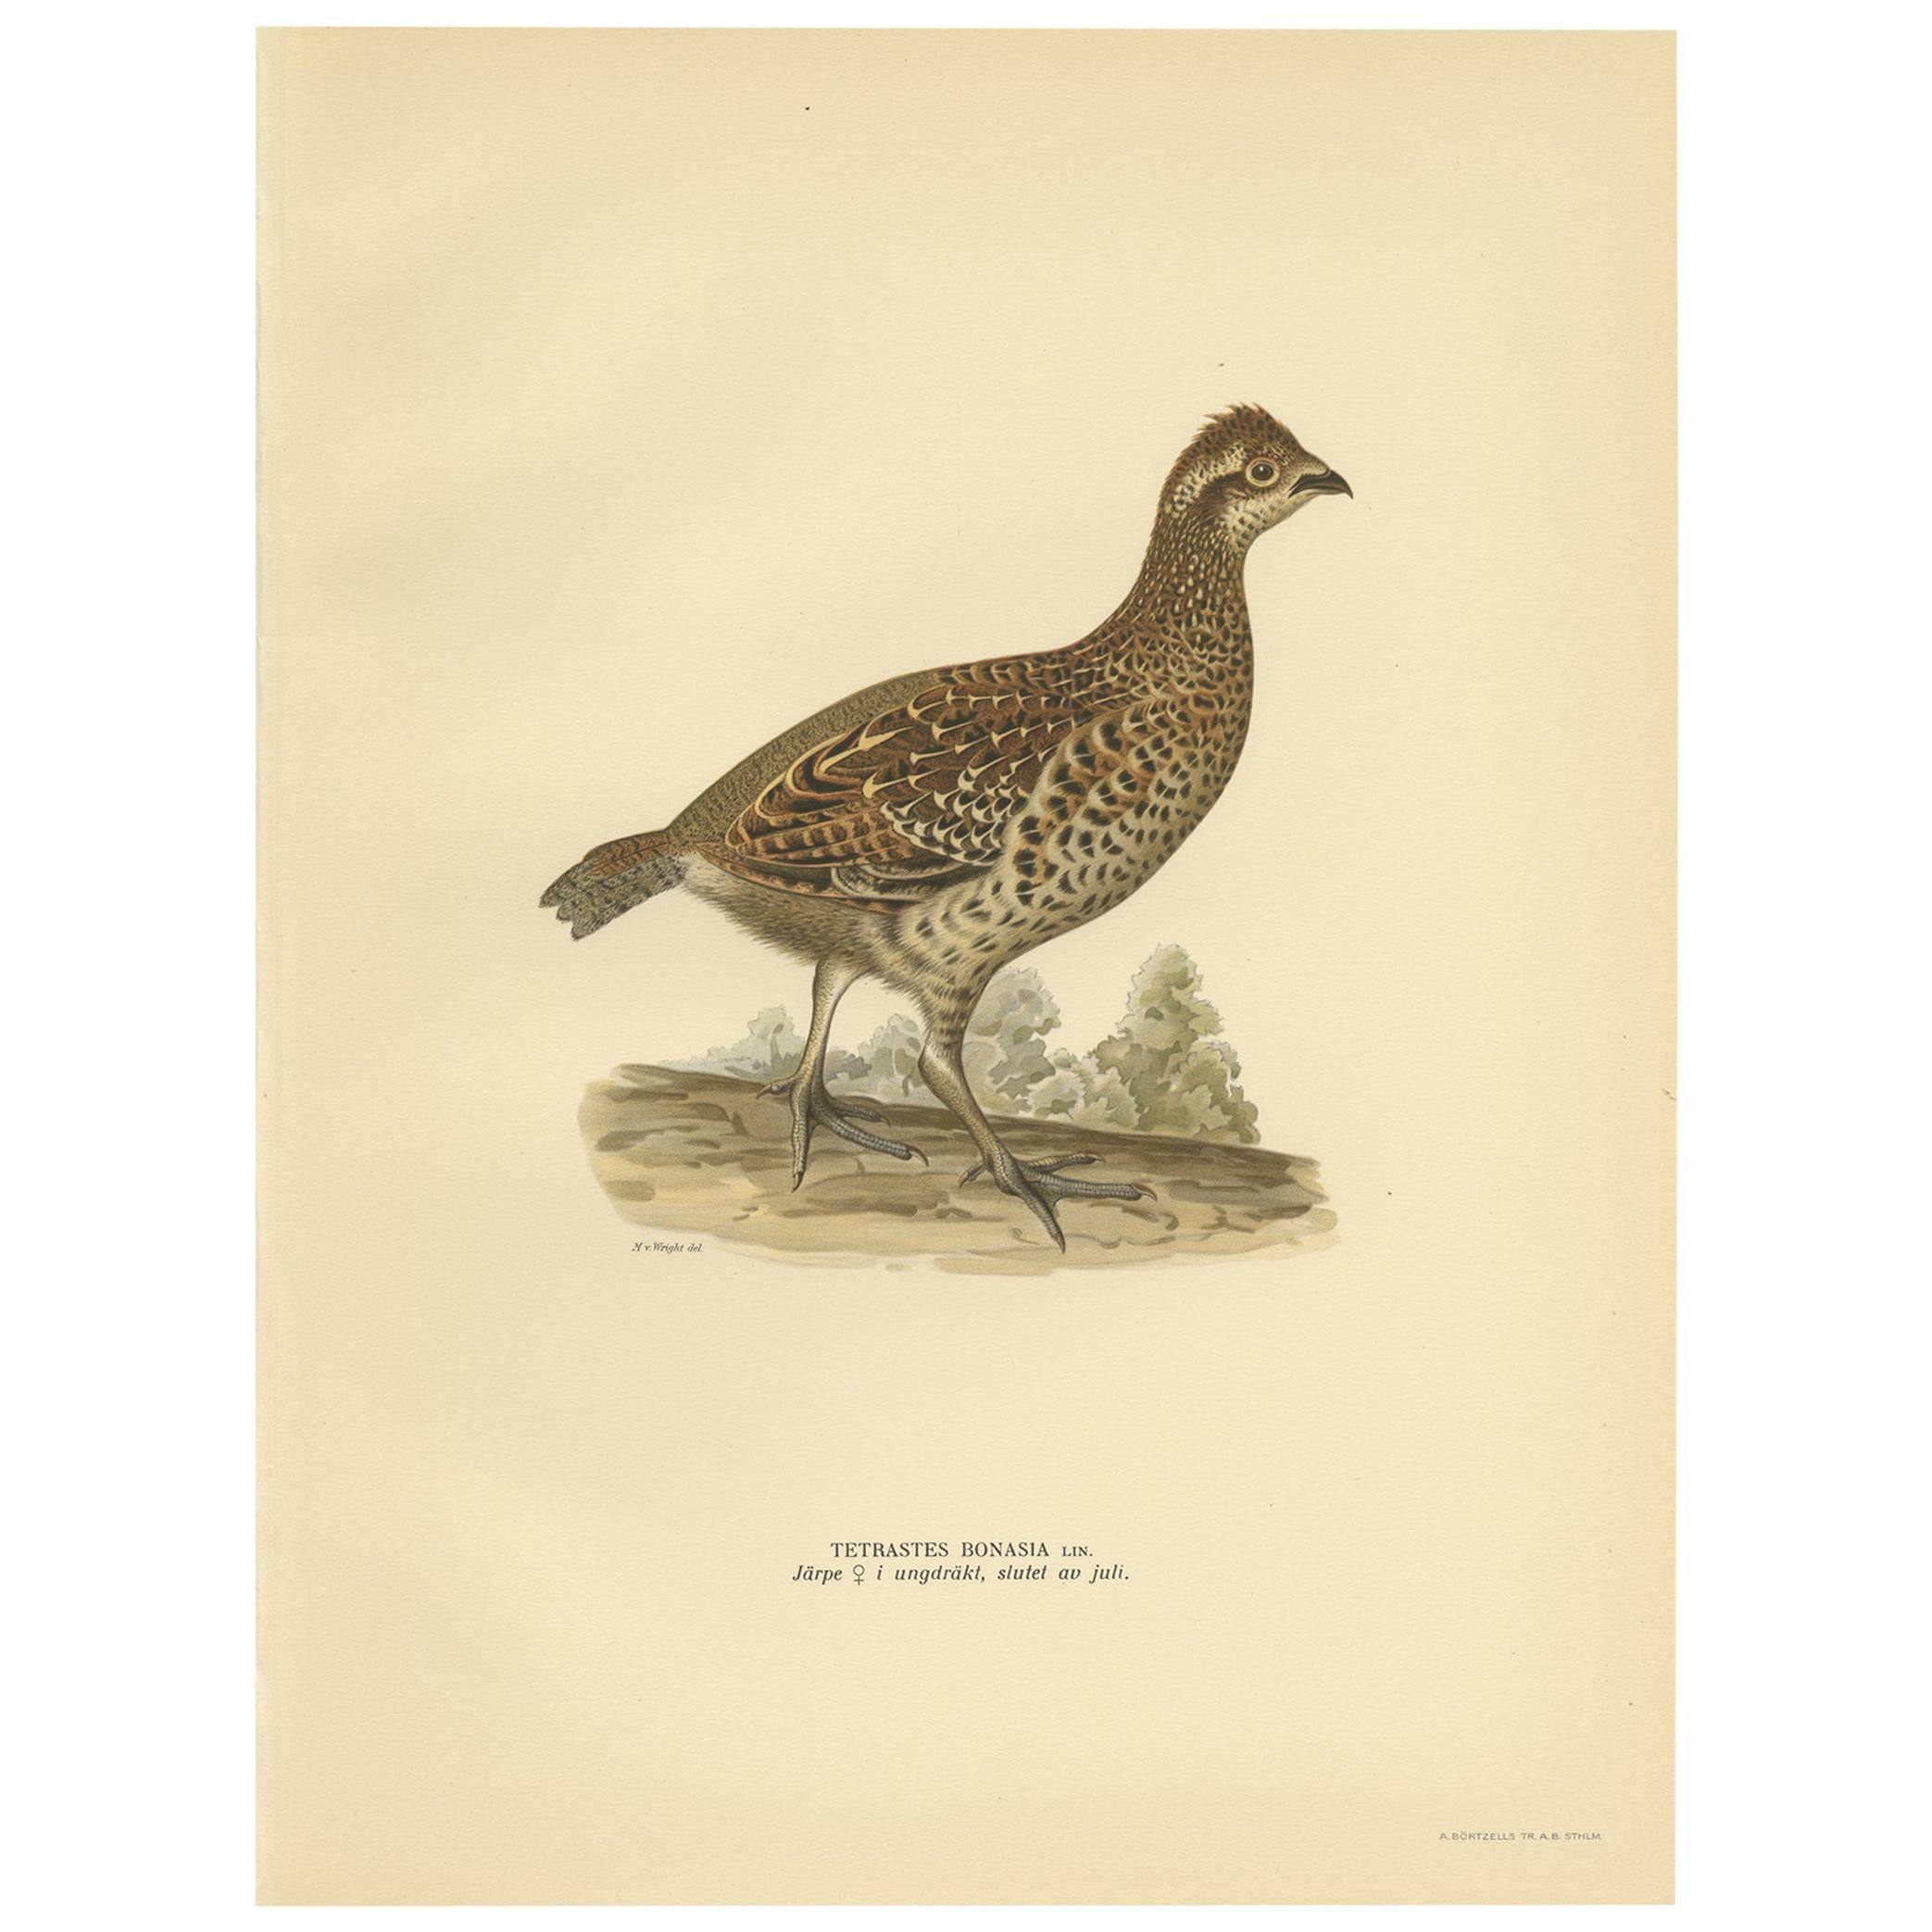 Antique Bird Print of the Hazel Grouse 'Female' by Von Wright '1929'